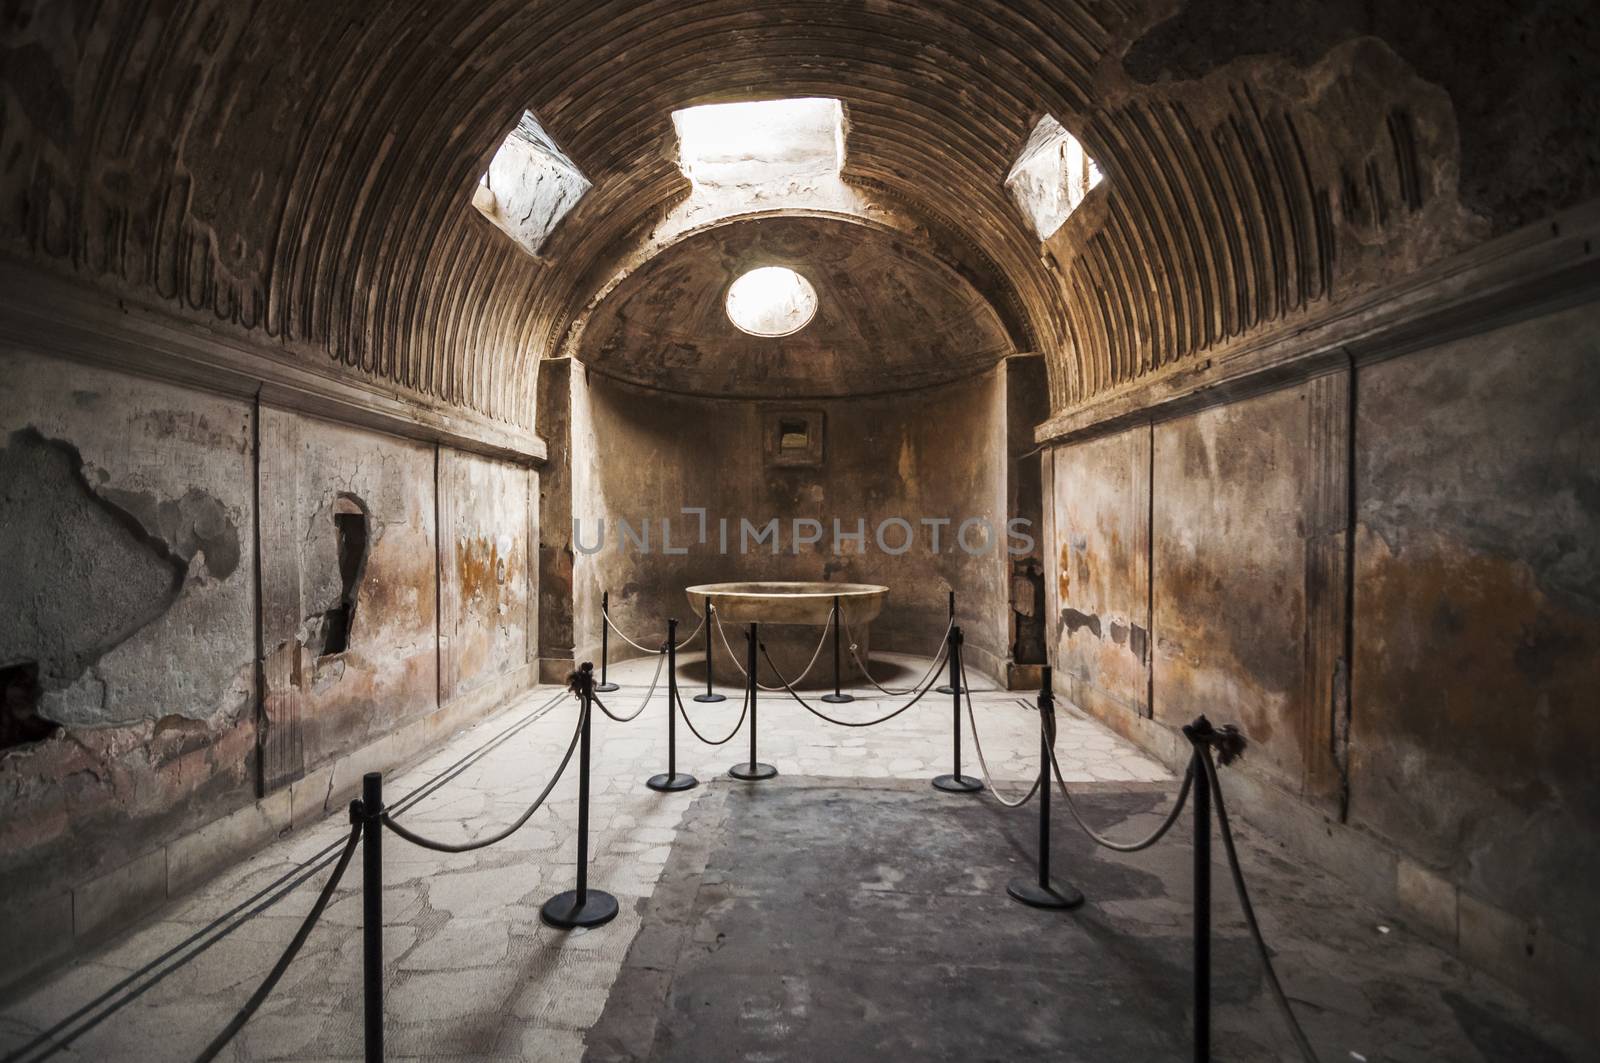 Roman Bath in the archeologic ruins of Pompeii in Italy